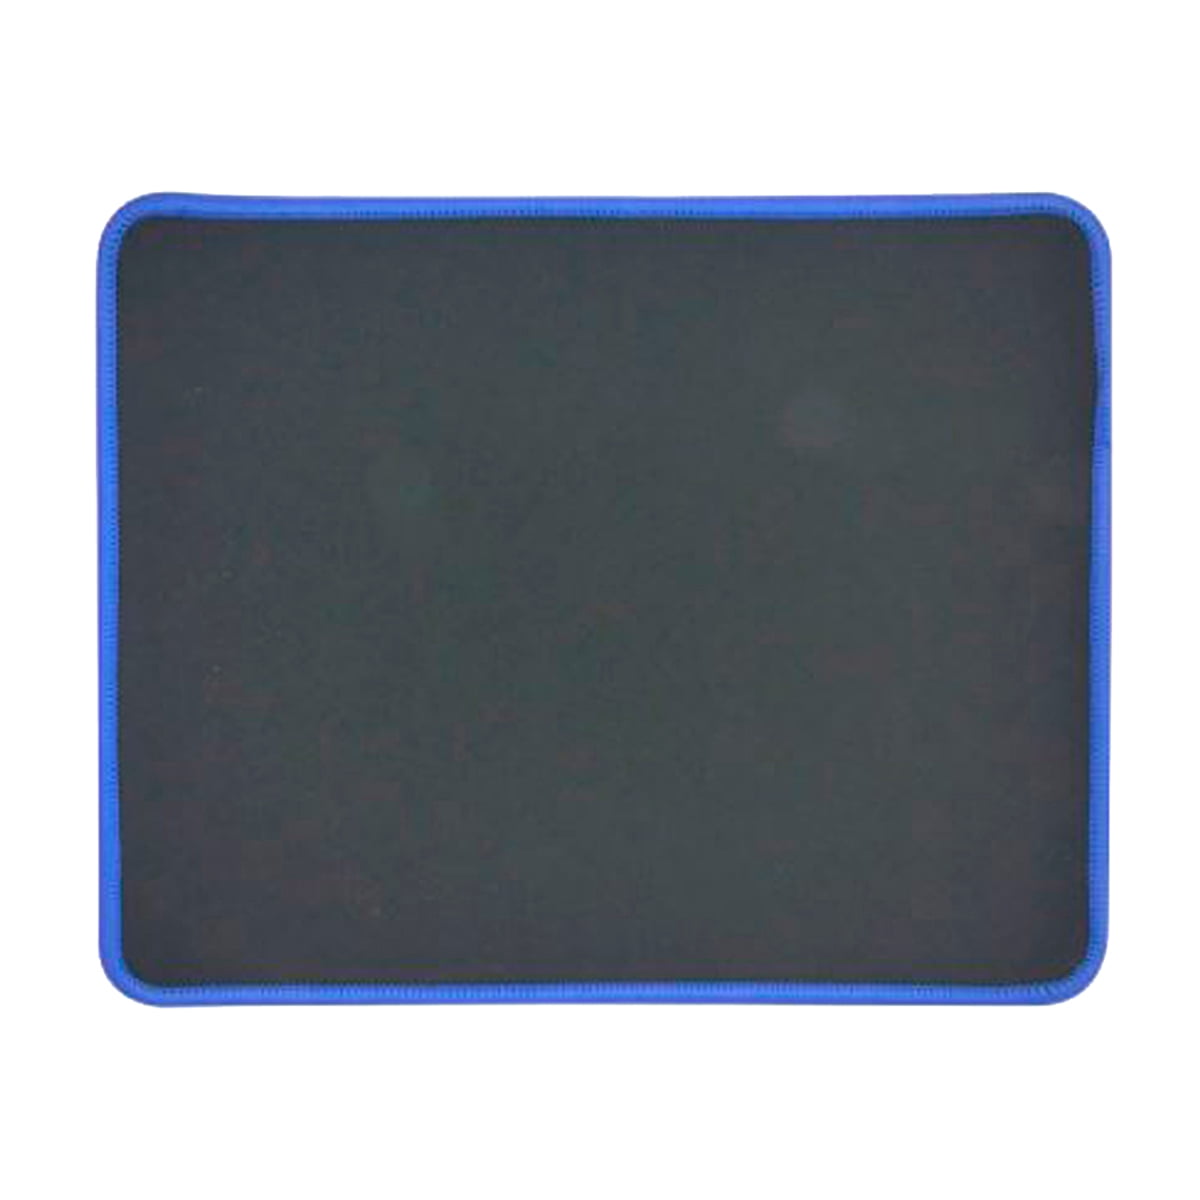 Mouse Pad Gamer Notebook 26 X 21 Cm Azul